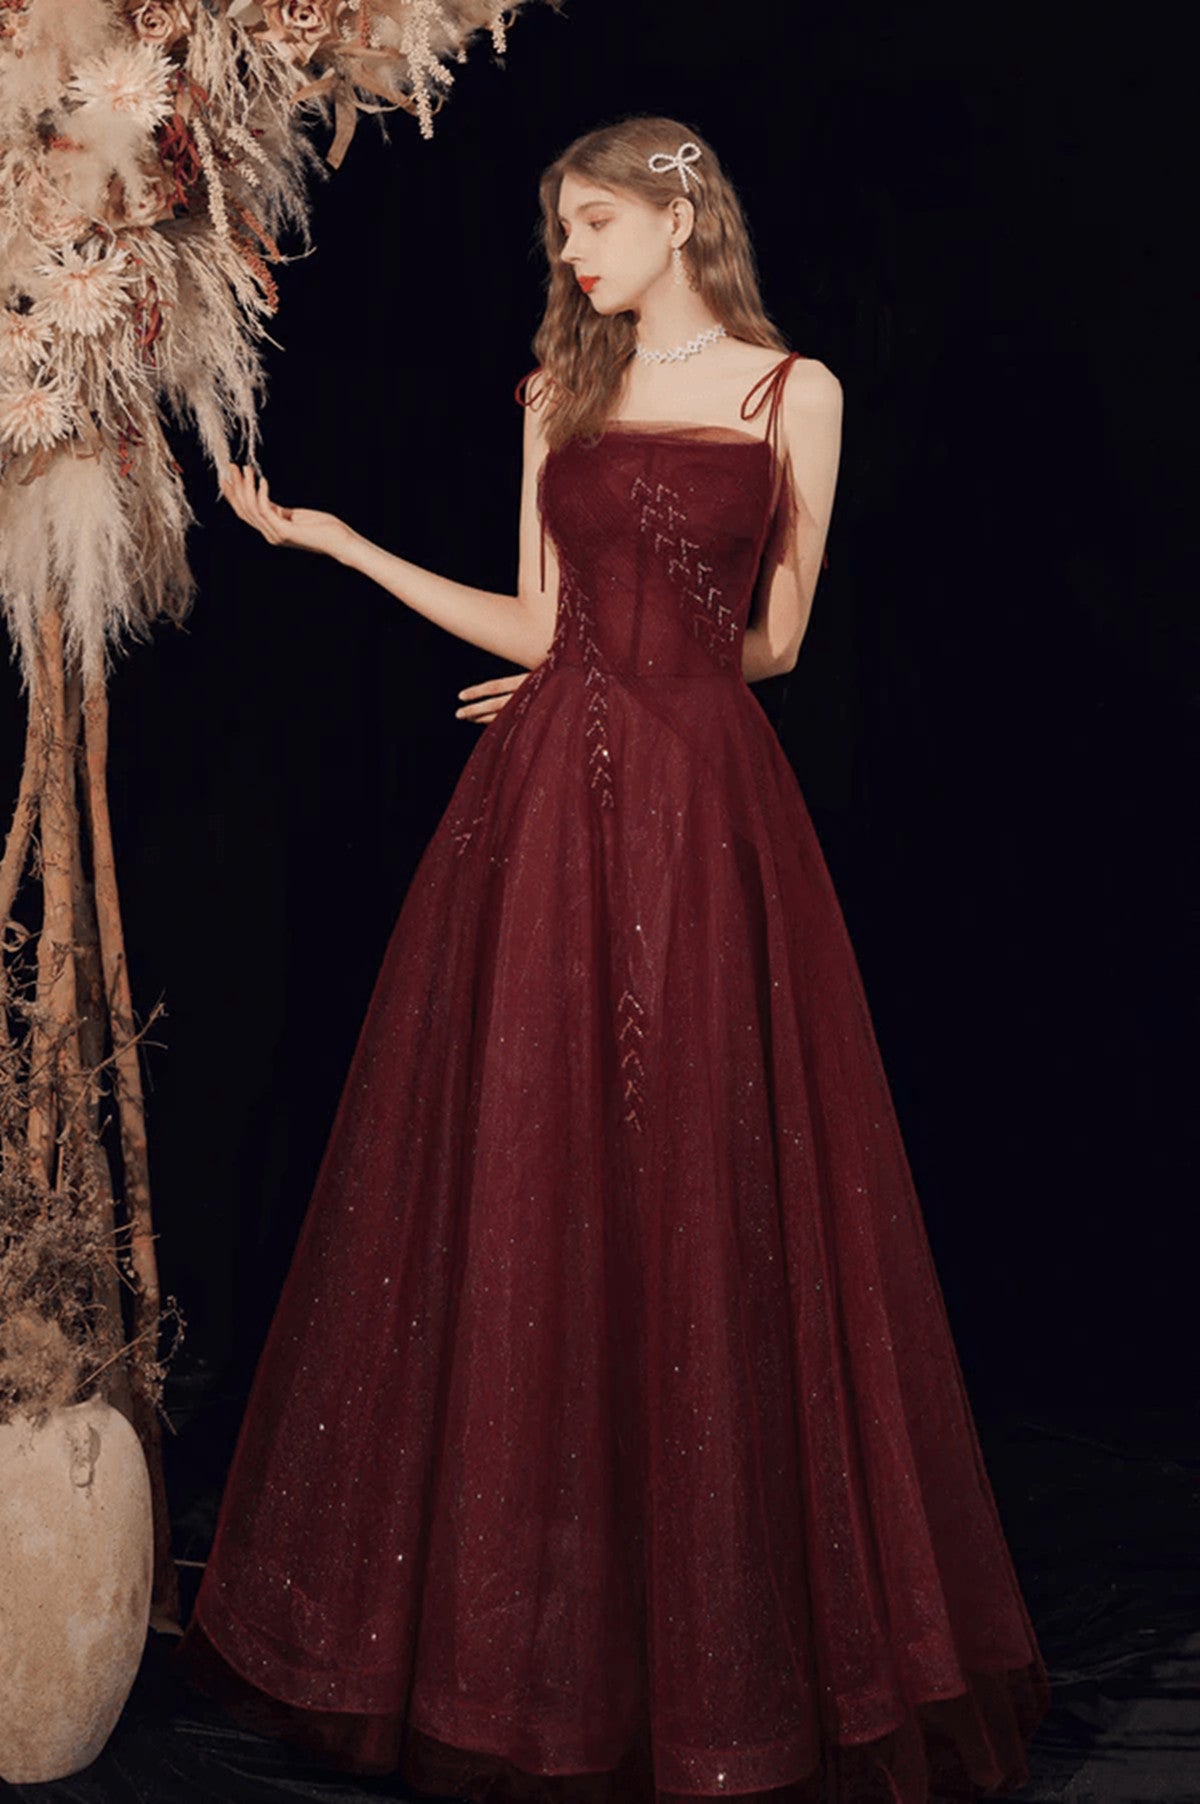 Wine Red Straps Tulle Beaded Long Prom Dress, Wine Red A-line Formal Dress